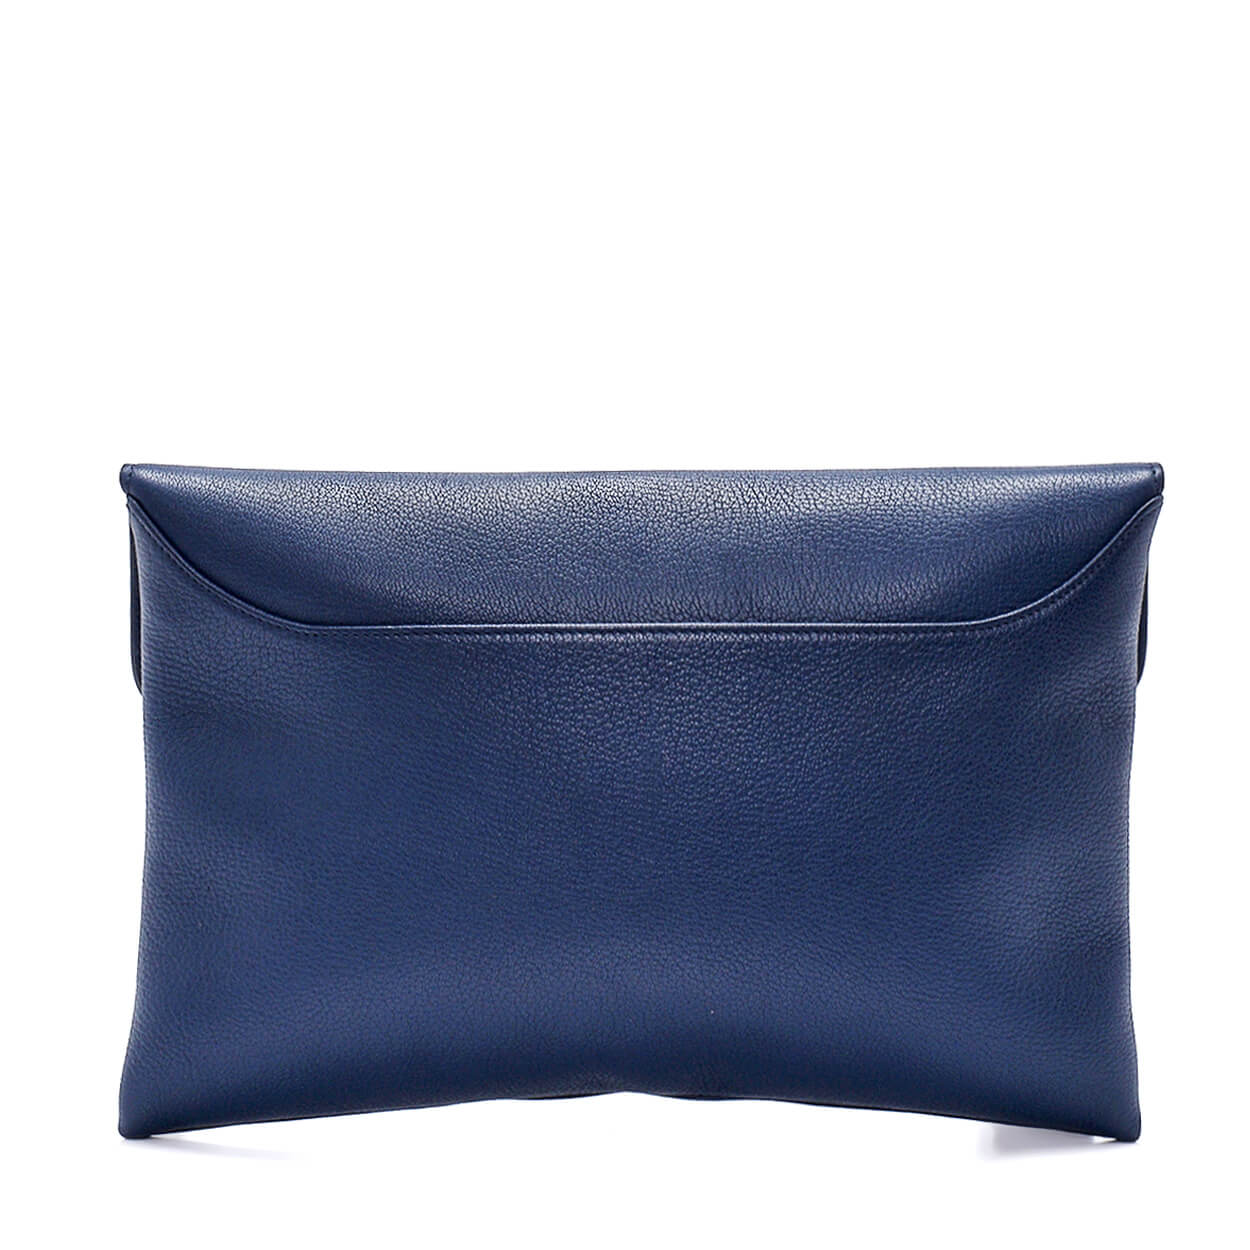 GIVENCHY - Navy Leather Envelope Clutch